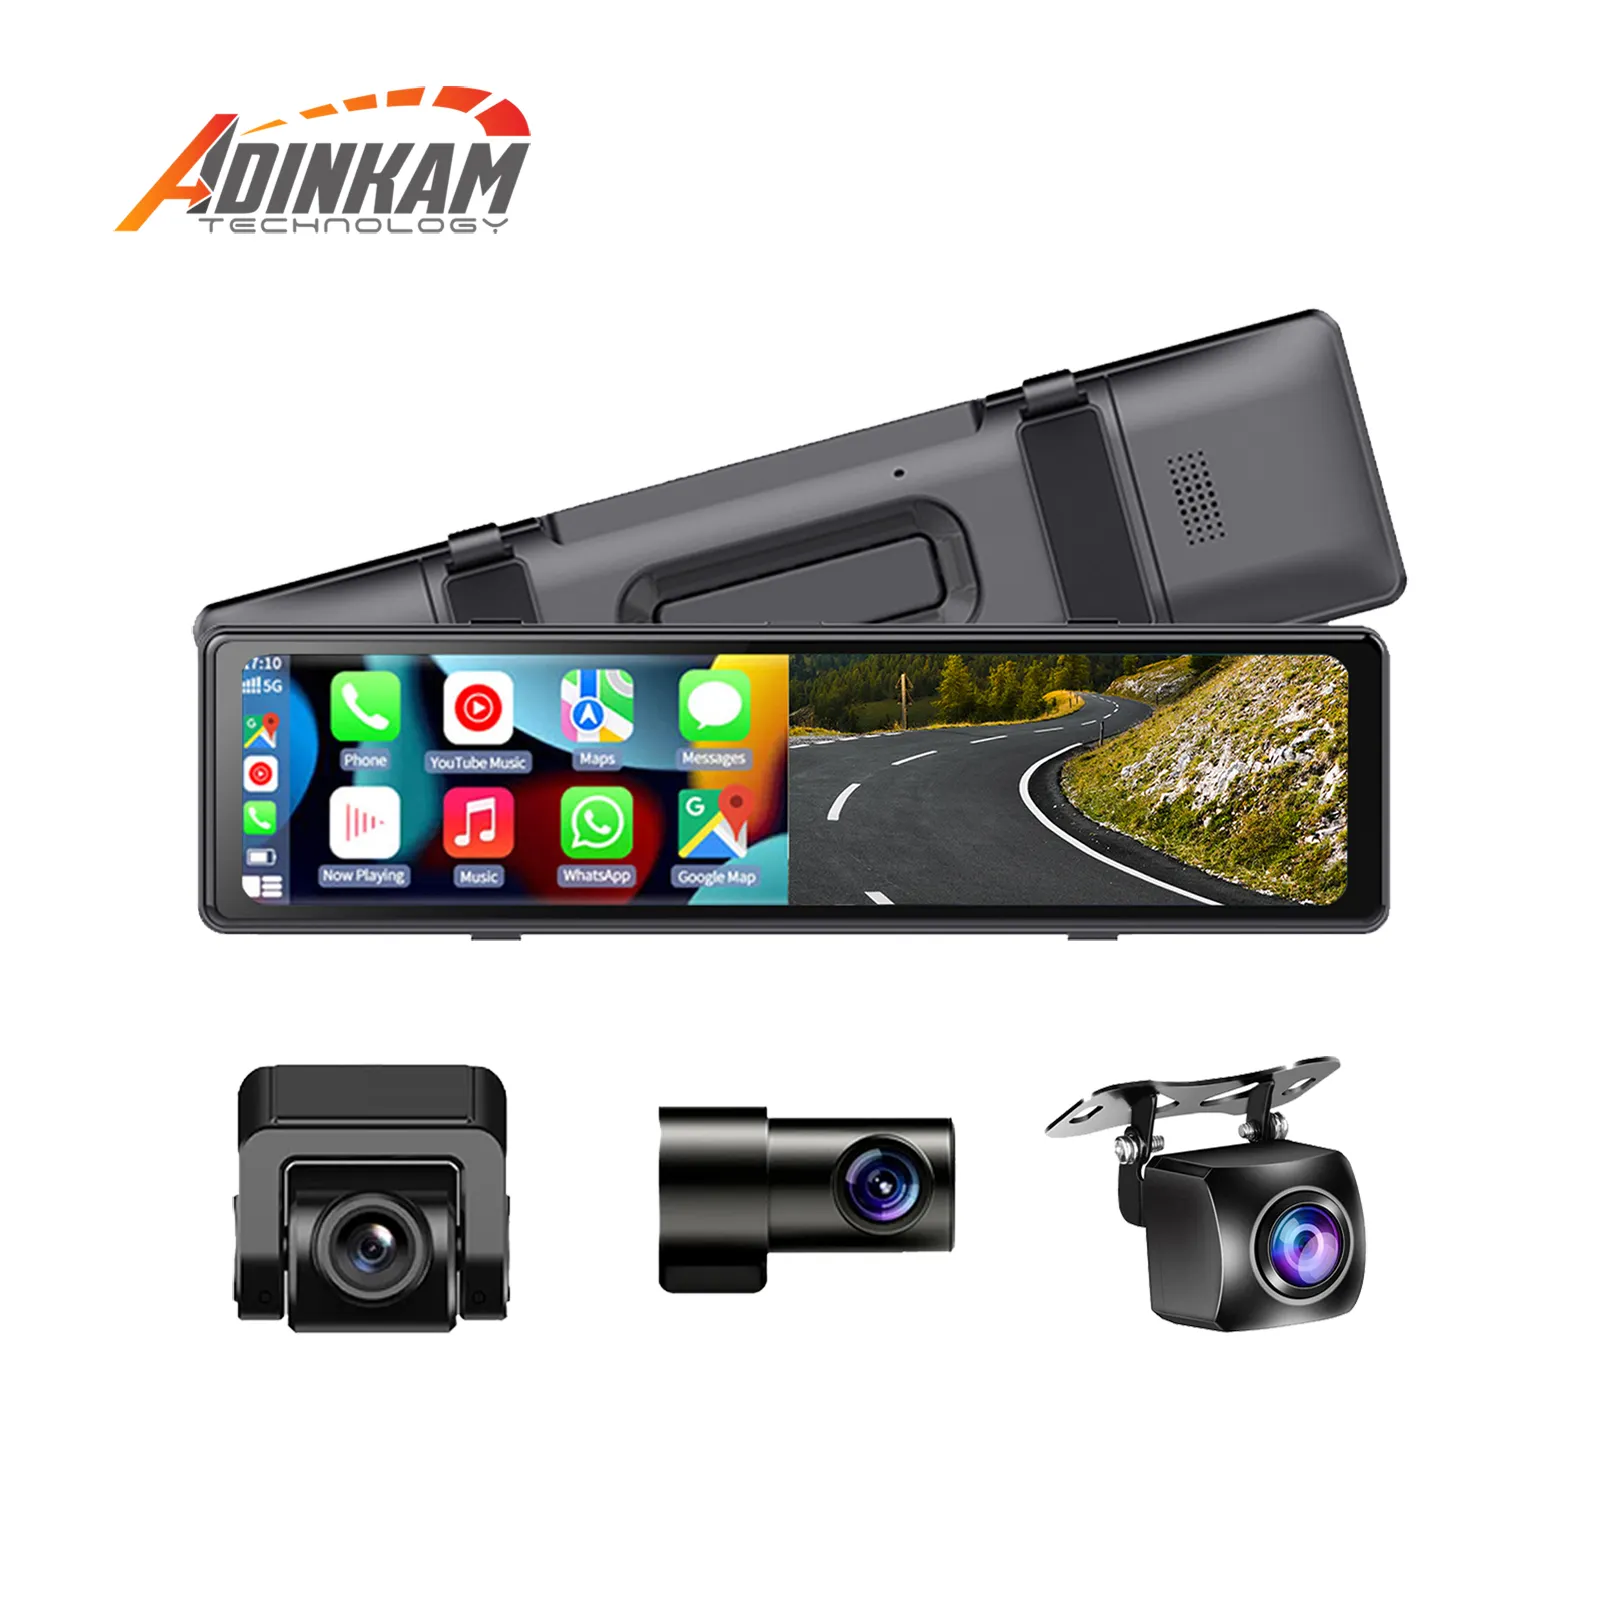 12" V31 Wireless Carplay Rearview Mirror Dash Cam and Wireless Android Auto with 3 Channel Lens Camera DVR Recorder with WIFI FM